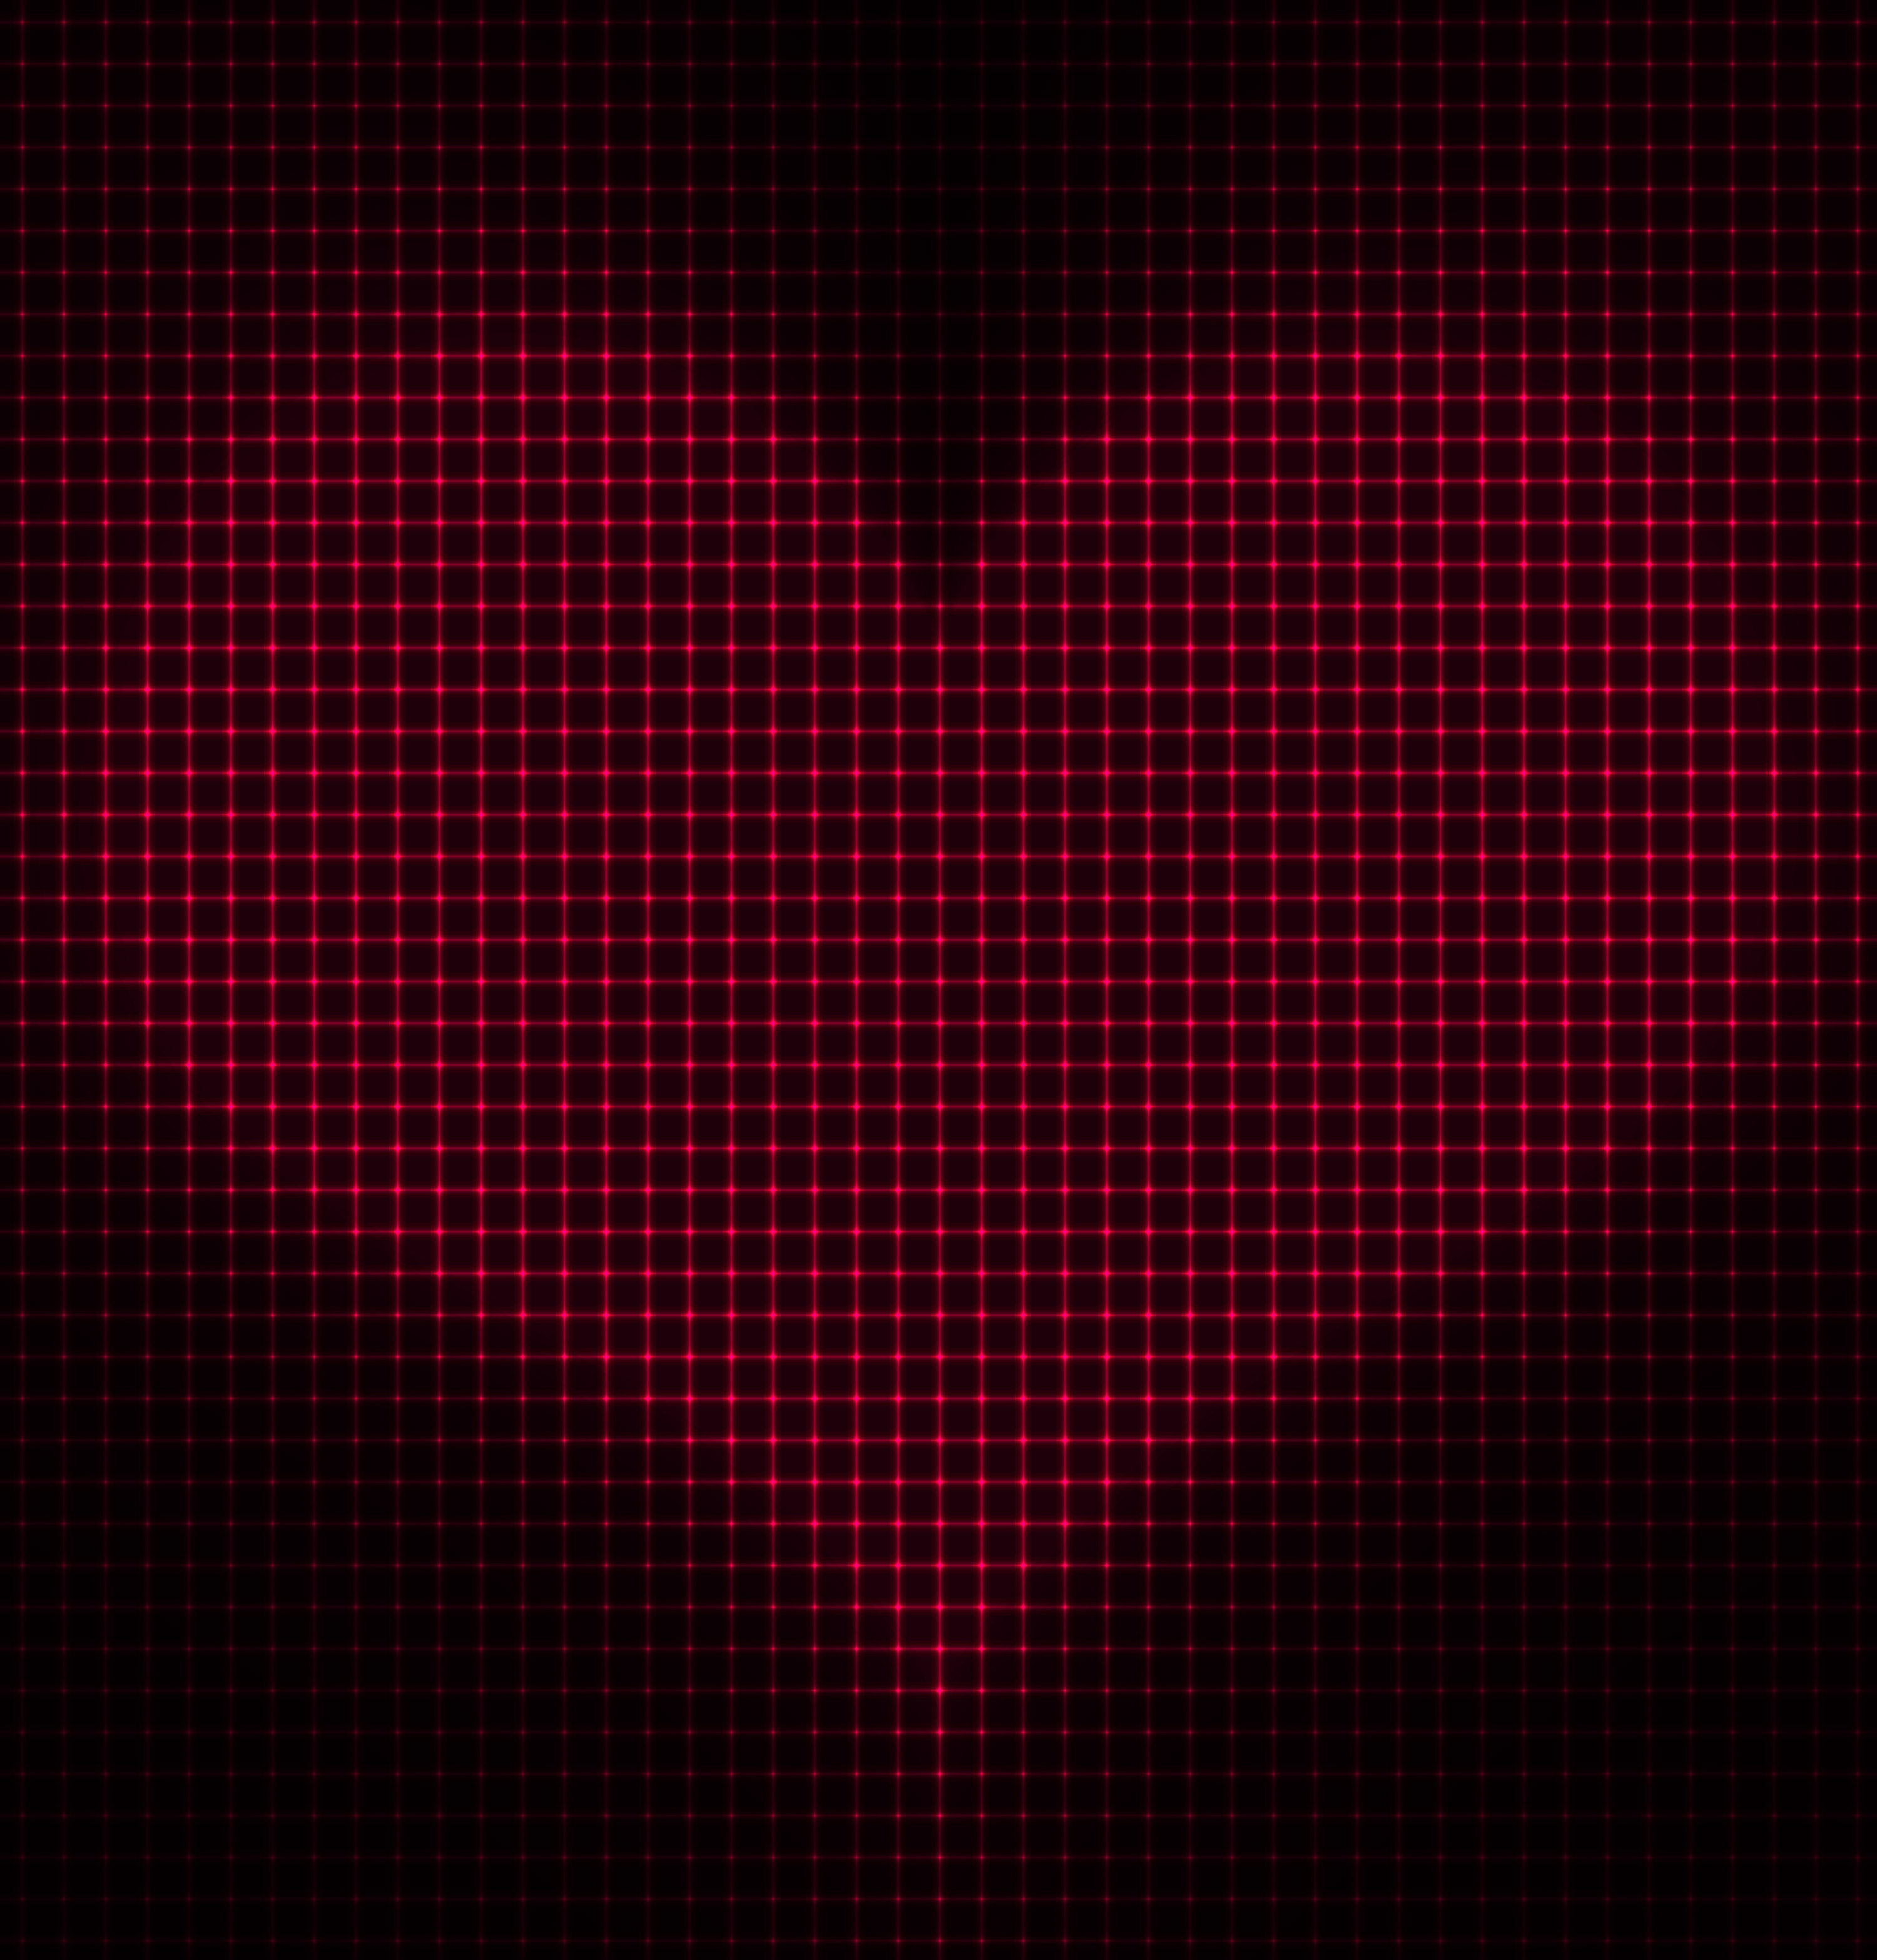 Red Hearts Black Background